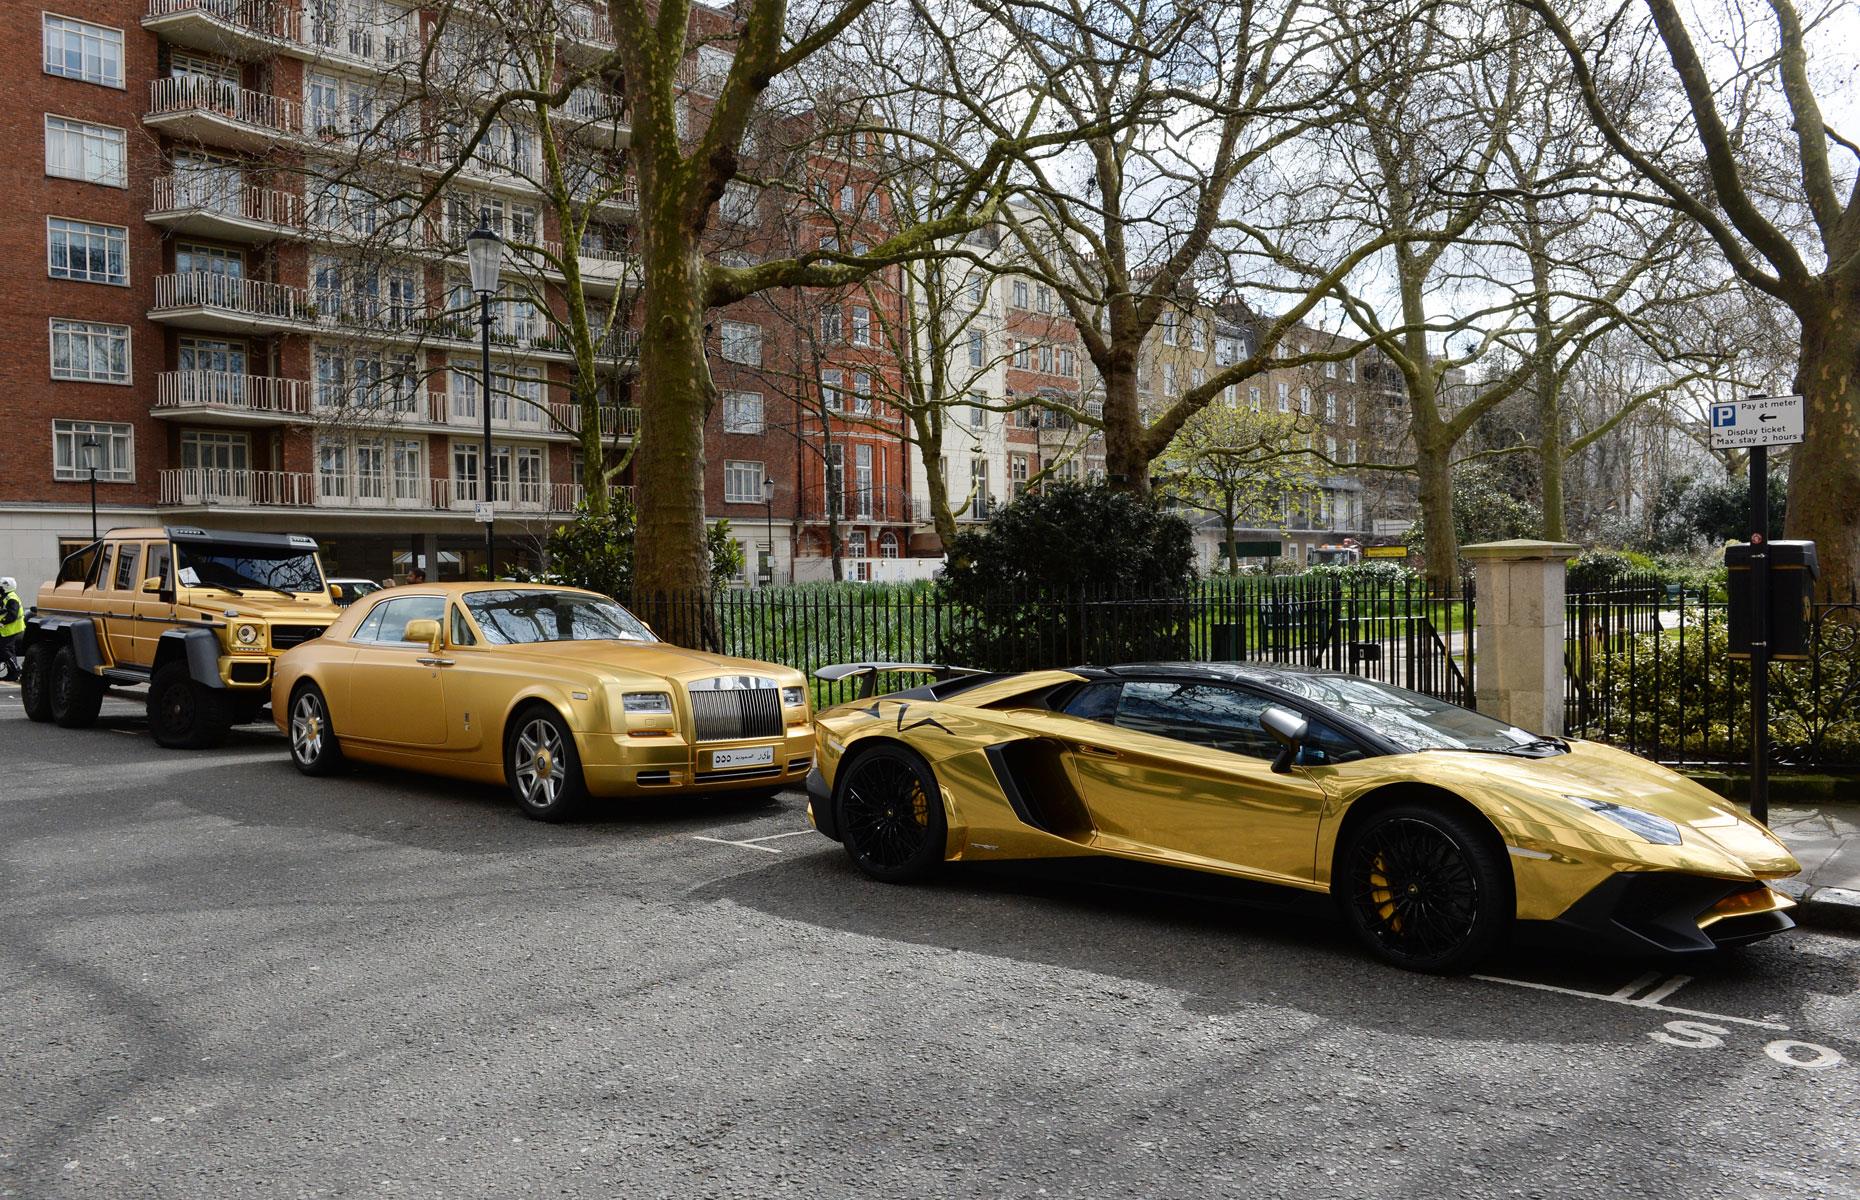 <p>Suspected Saudi royal Turki Bin Abdullah took the UK capital by storm in 2016 when he imported his wow-factor collection of gold supercars and cruised around central London's streets in the eye-catching vehicles. They include two Lamborghinis, a Mercedes AMG off-roader, Rolls-Royce Phantom Coupe and Bentley Flying Spur, which together were reportedly worth more than $2 million (£1.2m). He spends thousands having his vehicles coated in gold, his favourite colour.</p>